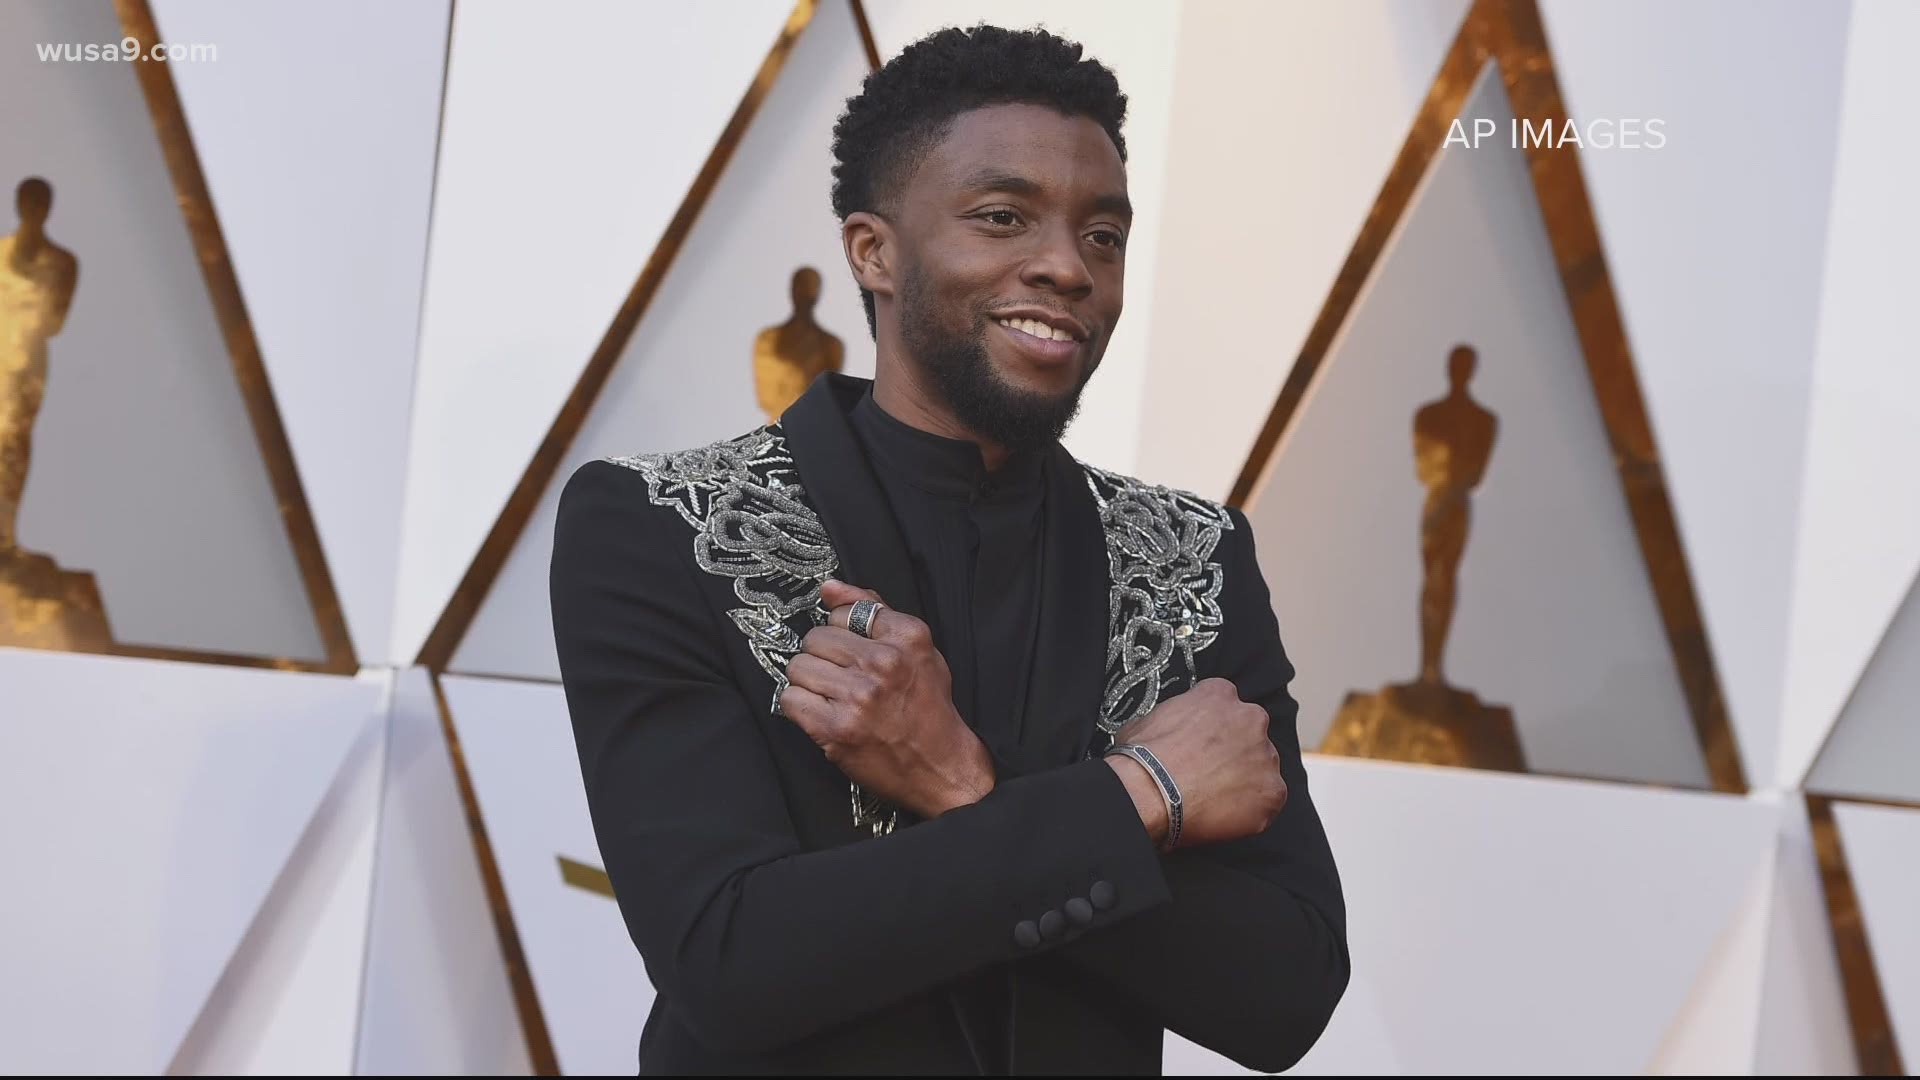 Following the death of 43-year-old actor Chadwick Boseman, tributes and messages of support continued to come in on Saturday for the Howard University alum.